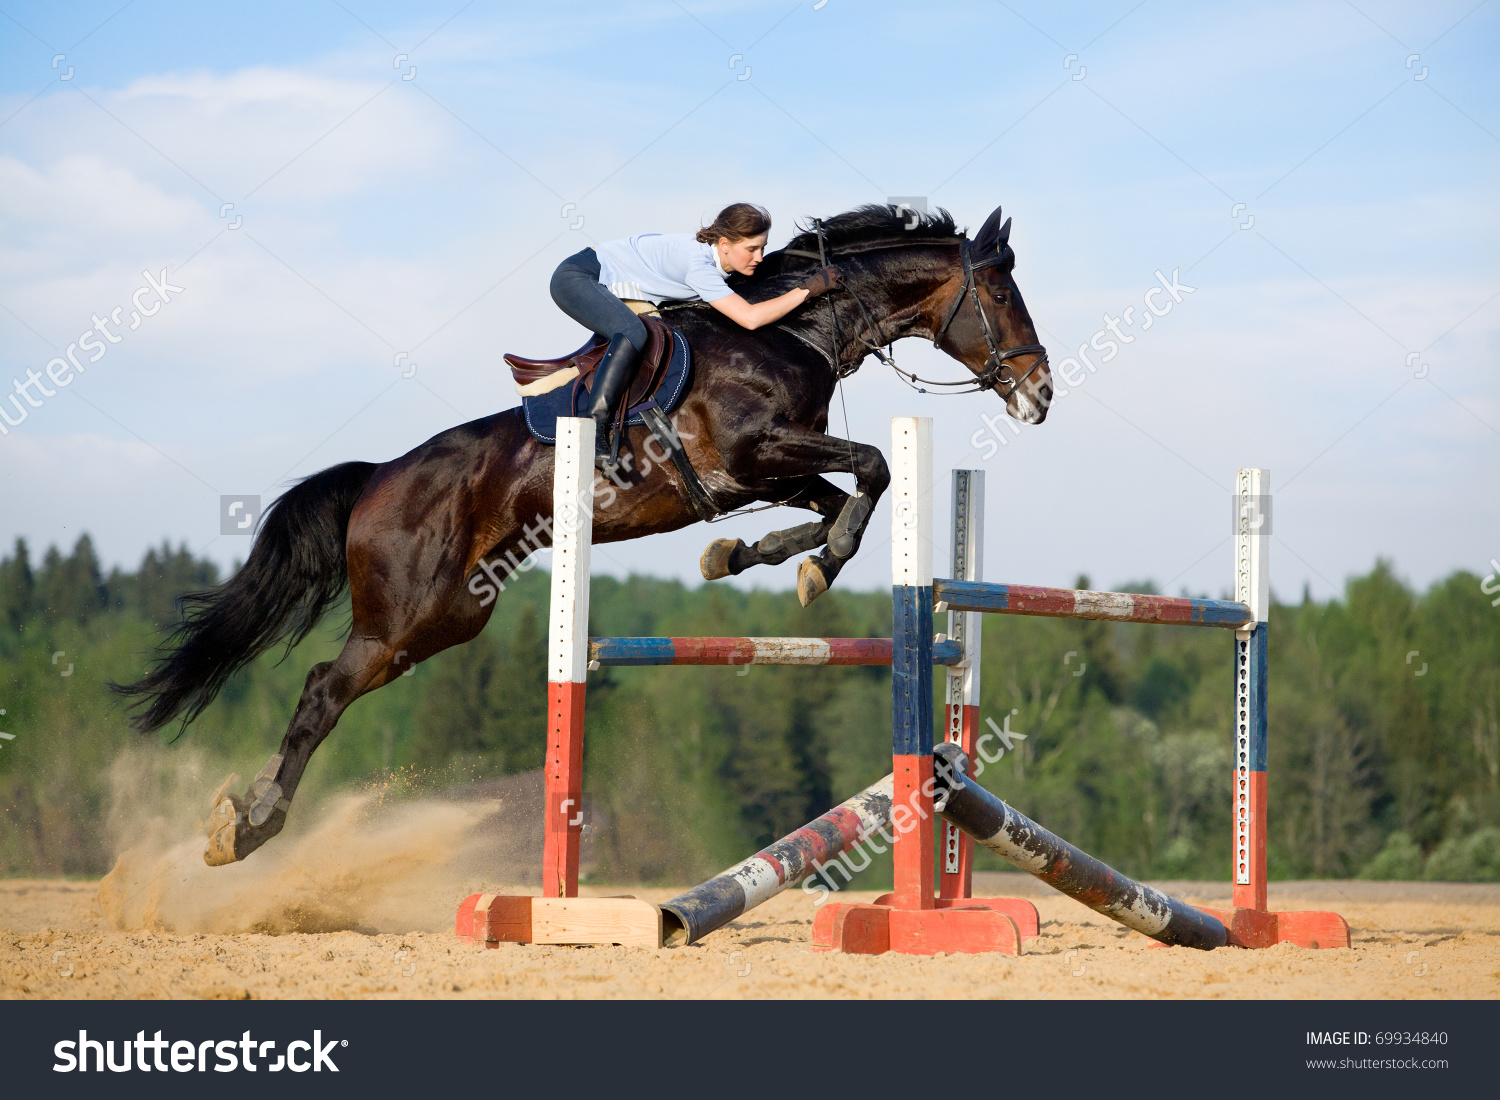 Show Jumping Pics, Sports Collection